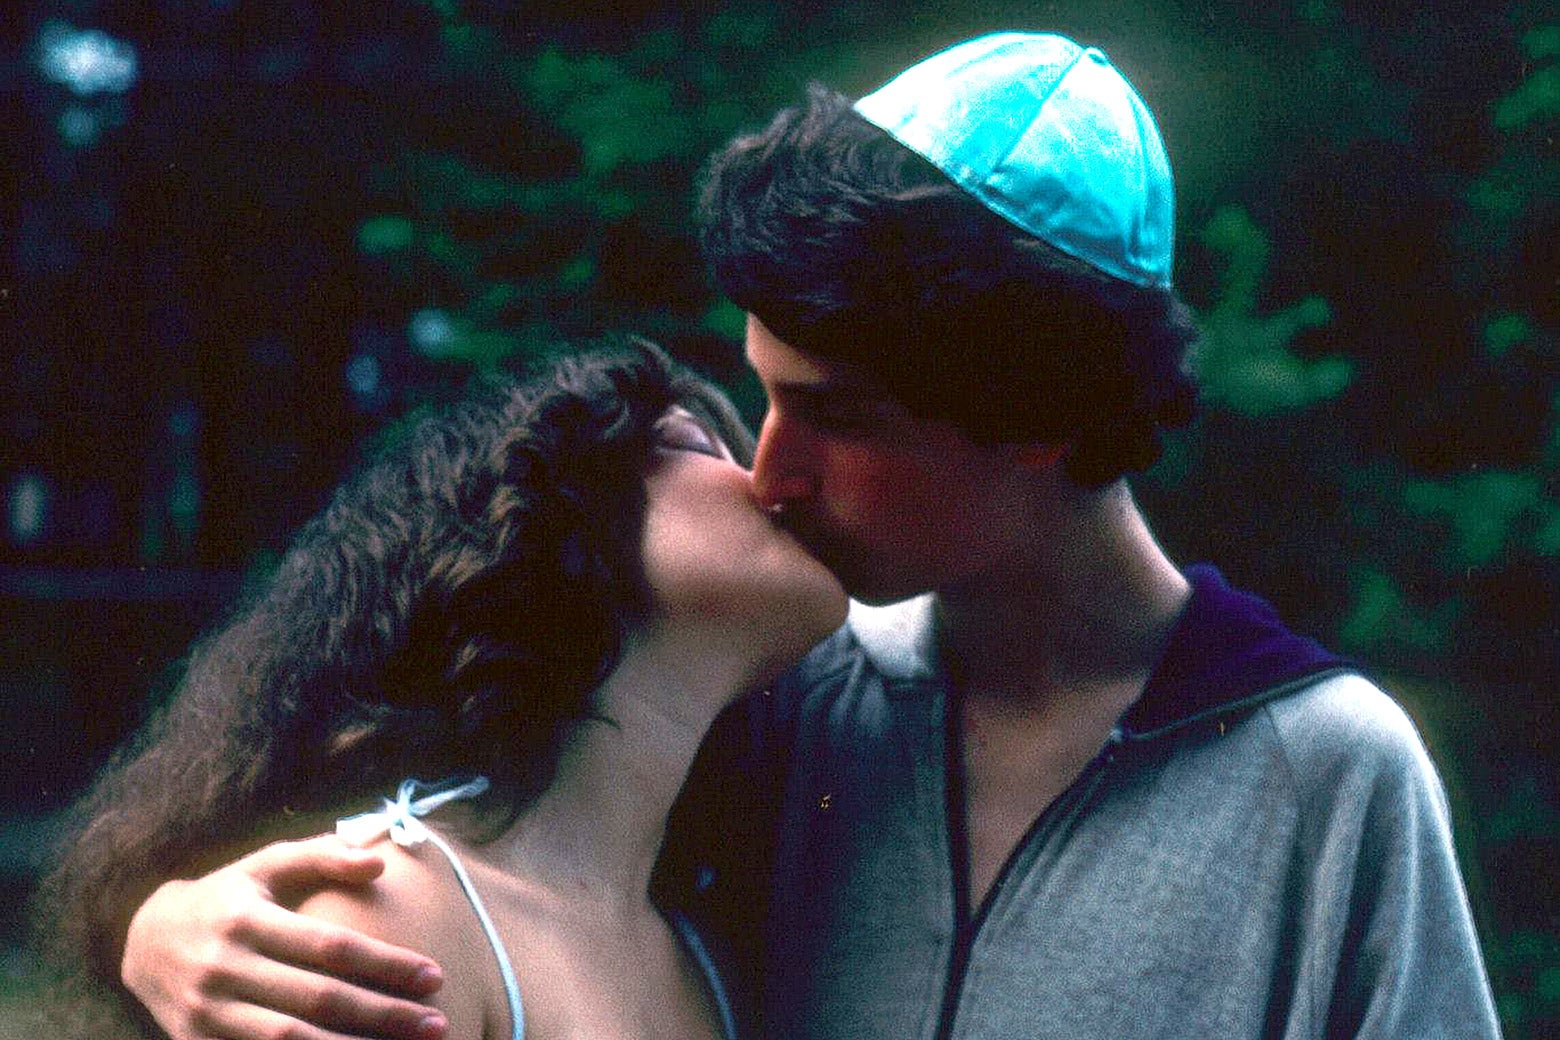 Jewish summer camp hookup scene How this tradition began.